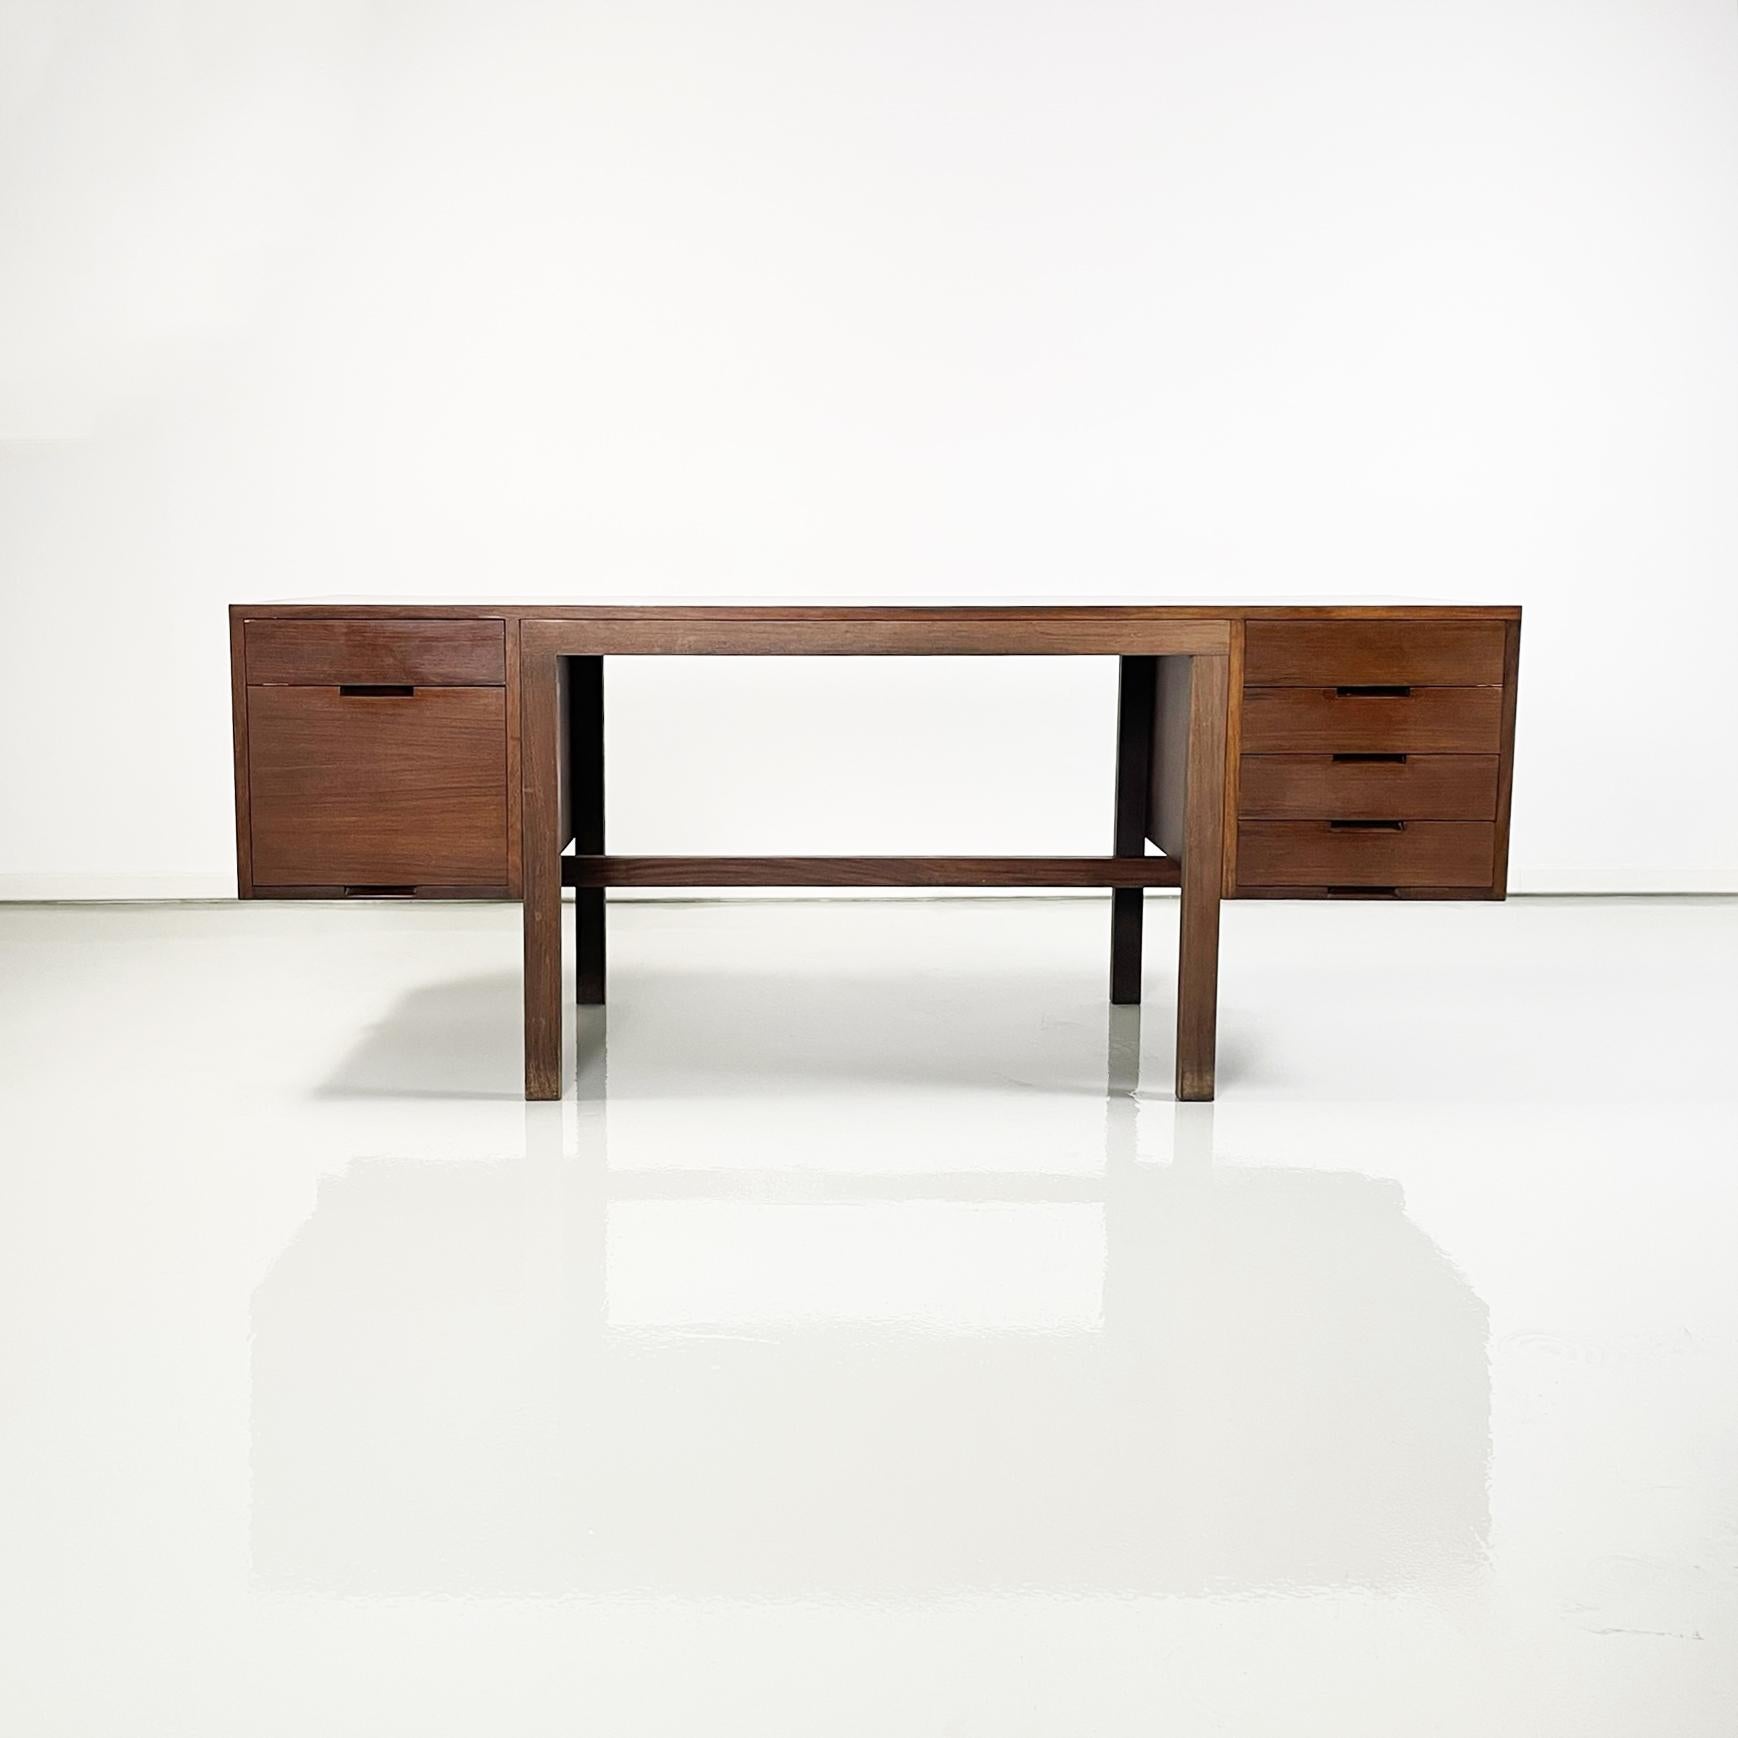 Italian modern Wooden desk mod. Canaan by Marcel Breuer for  Gavina, 1970s
Desk mod. Canaan with rectangular wooden top. On one side there are 2 drawers and on the other 4. It has a wooden crossbar in the lower part, which can be used to rest the